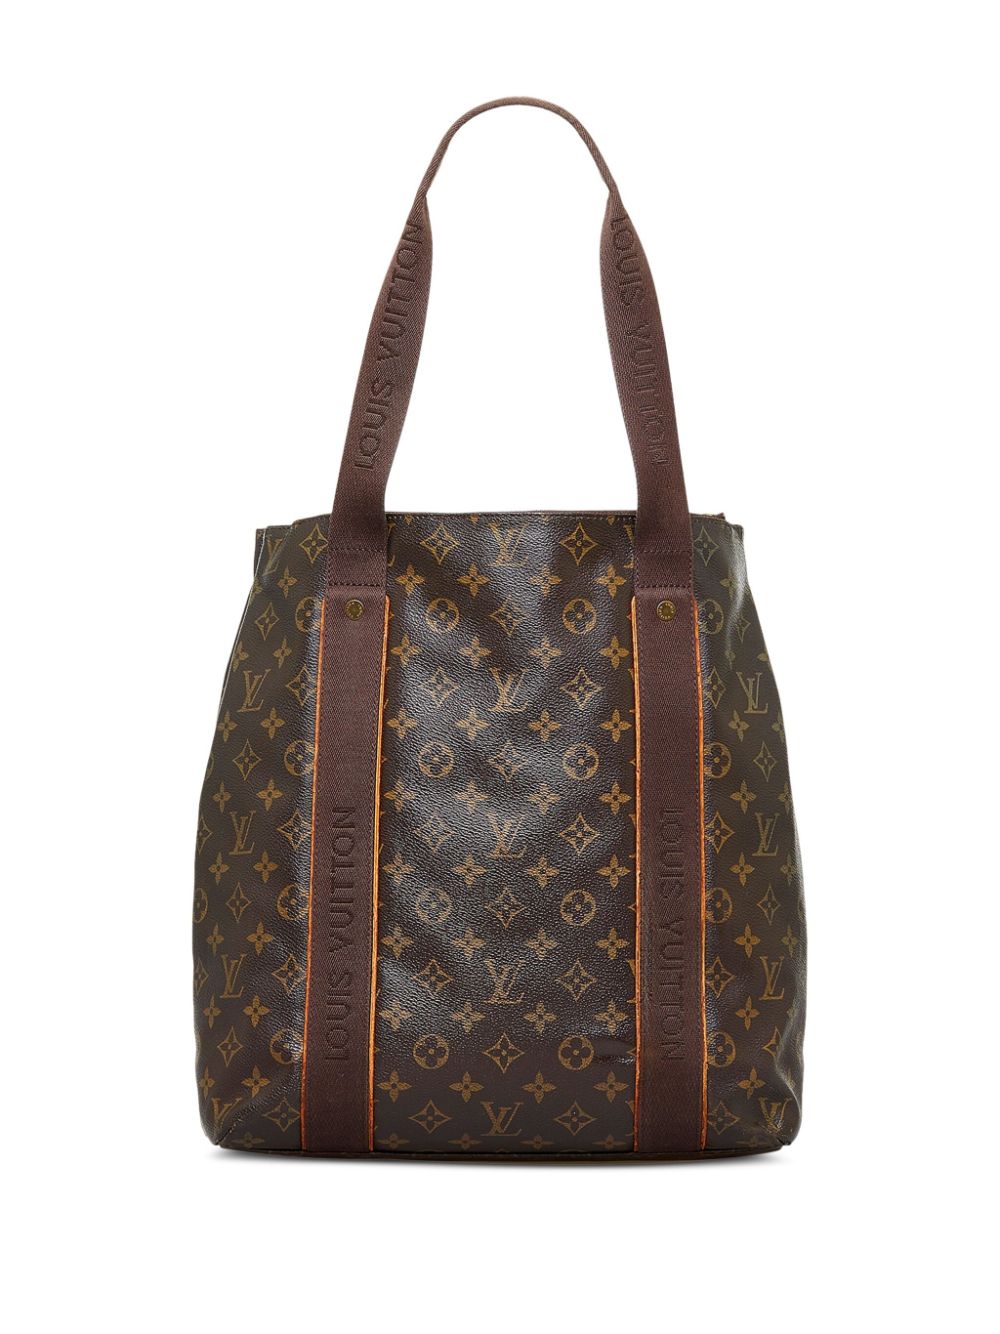 Louis Vuitton 2009 pre-owned Cabas Beaubourg tote bag - Bruin